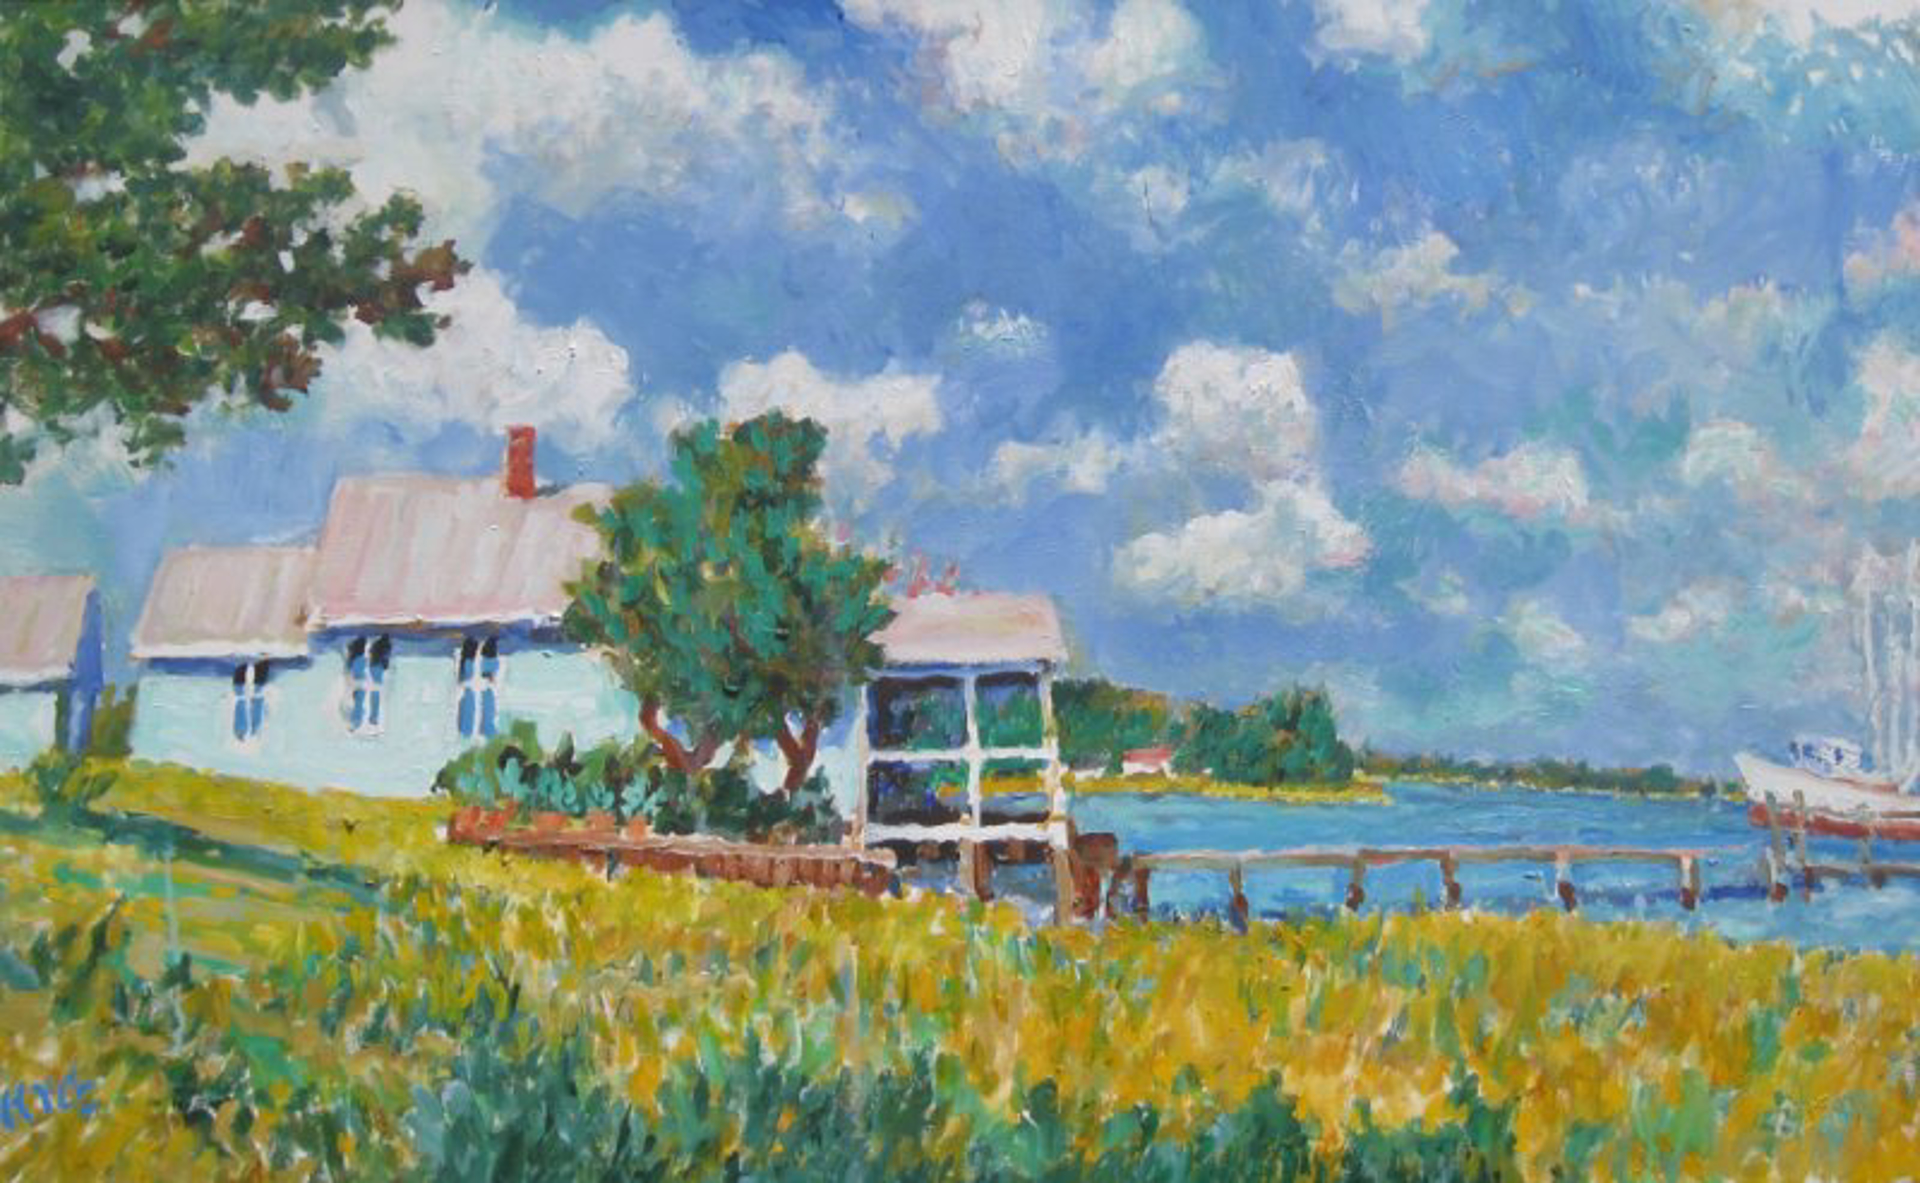 House and Boat on Calico Creek by Kyle Highsmith